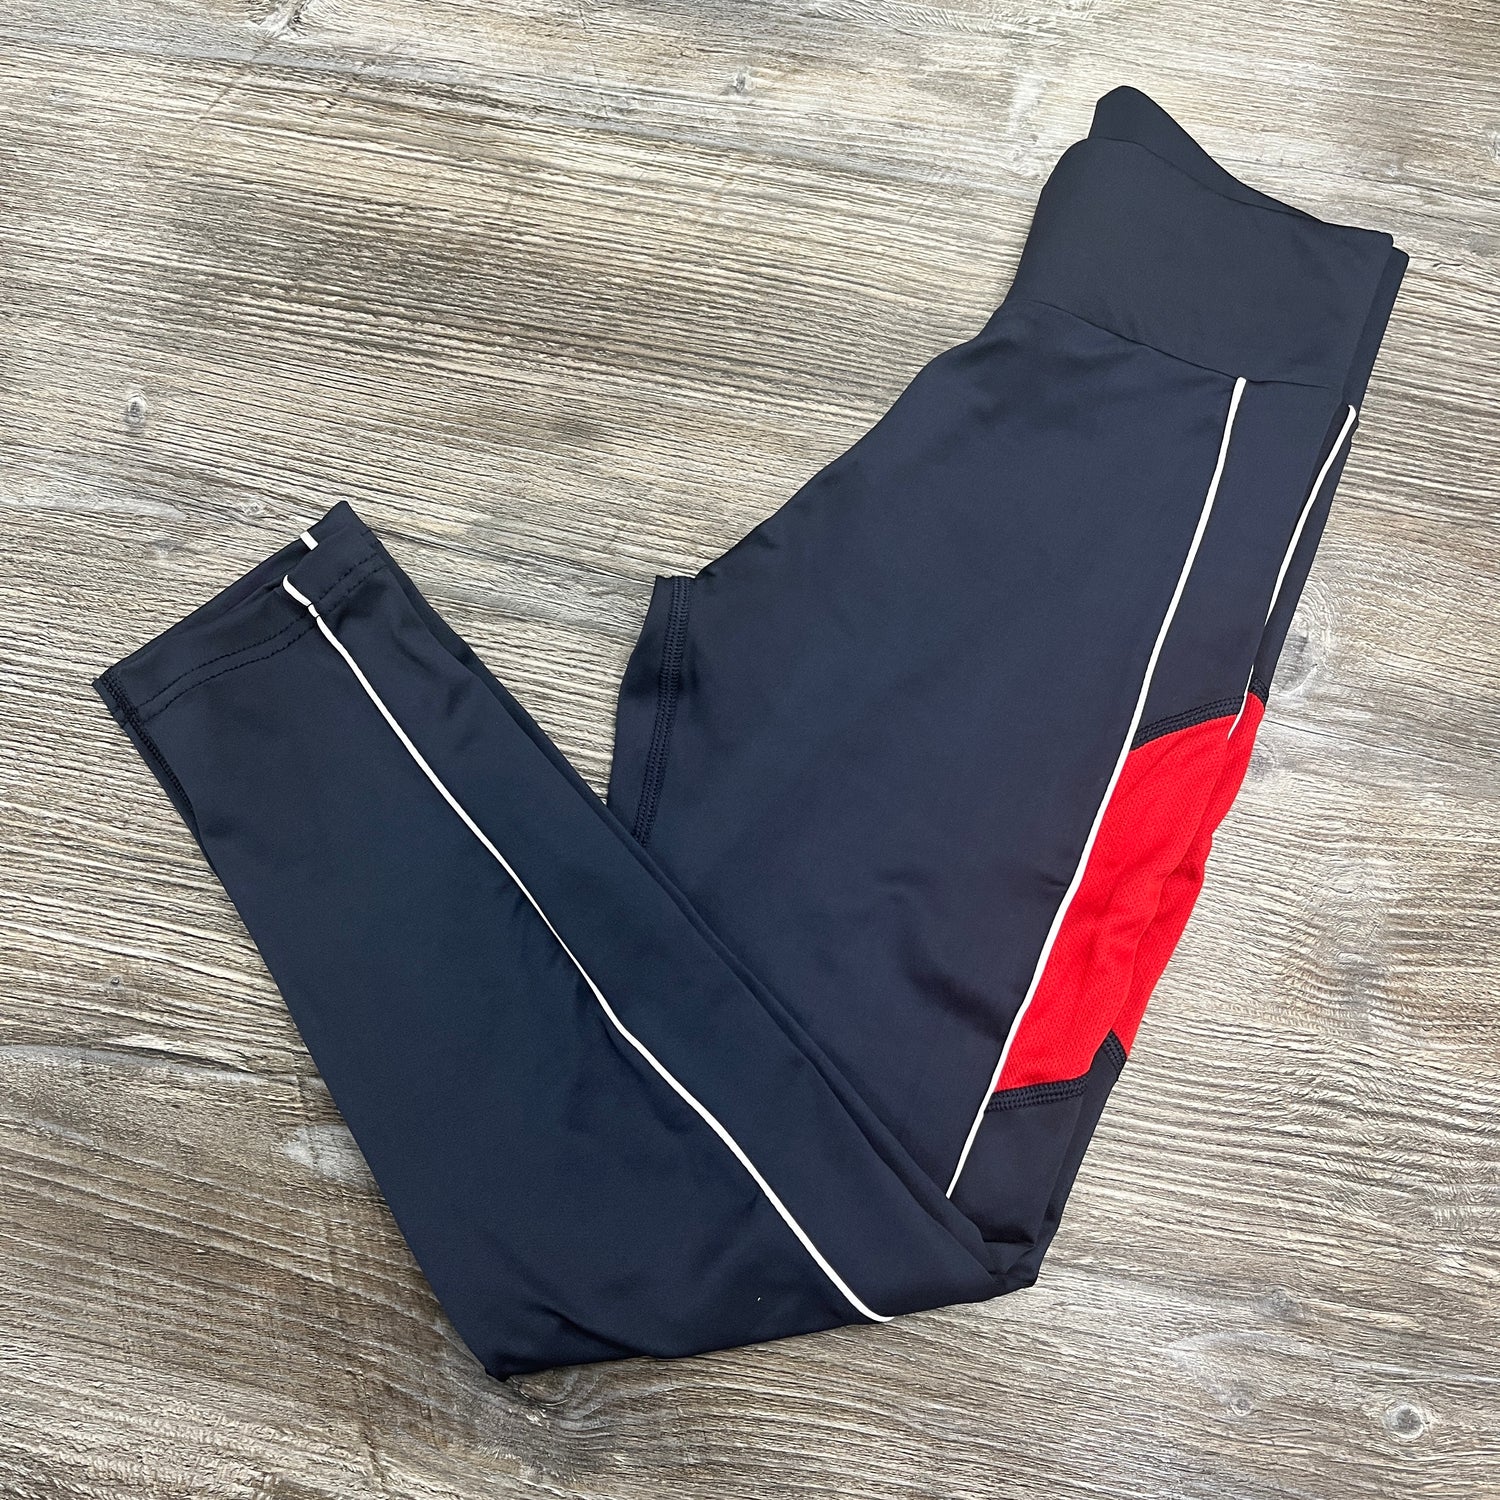 QEGS Navy and Red PE Leggings